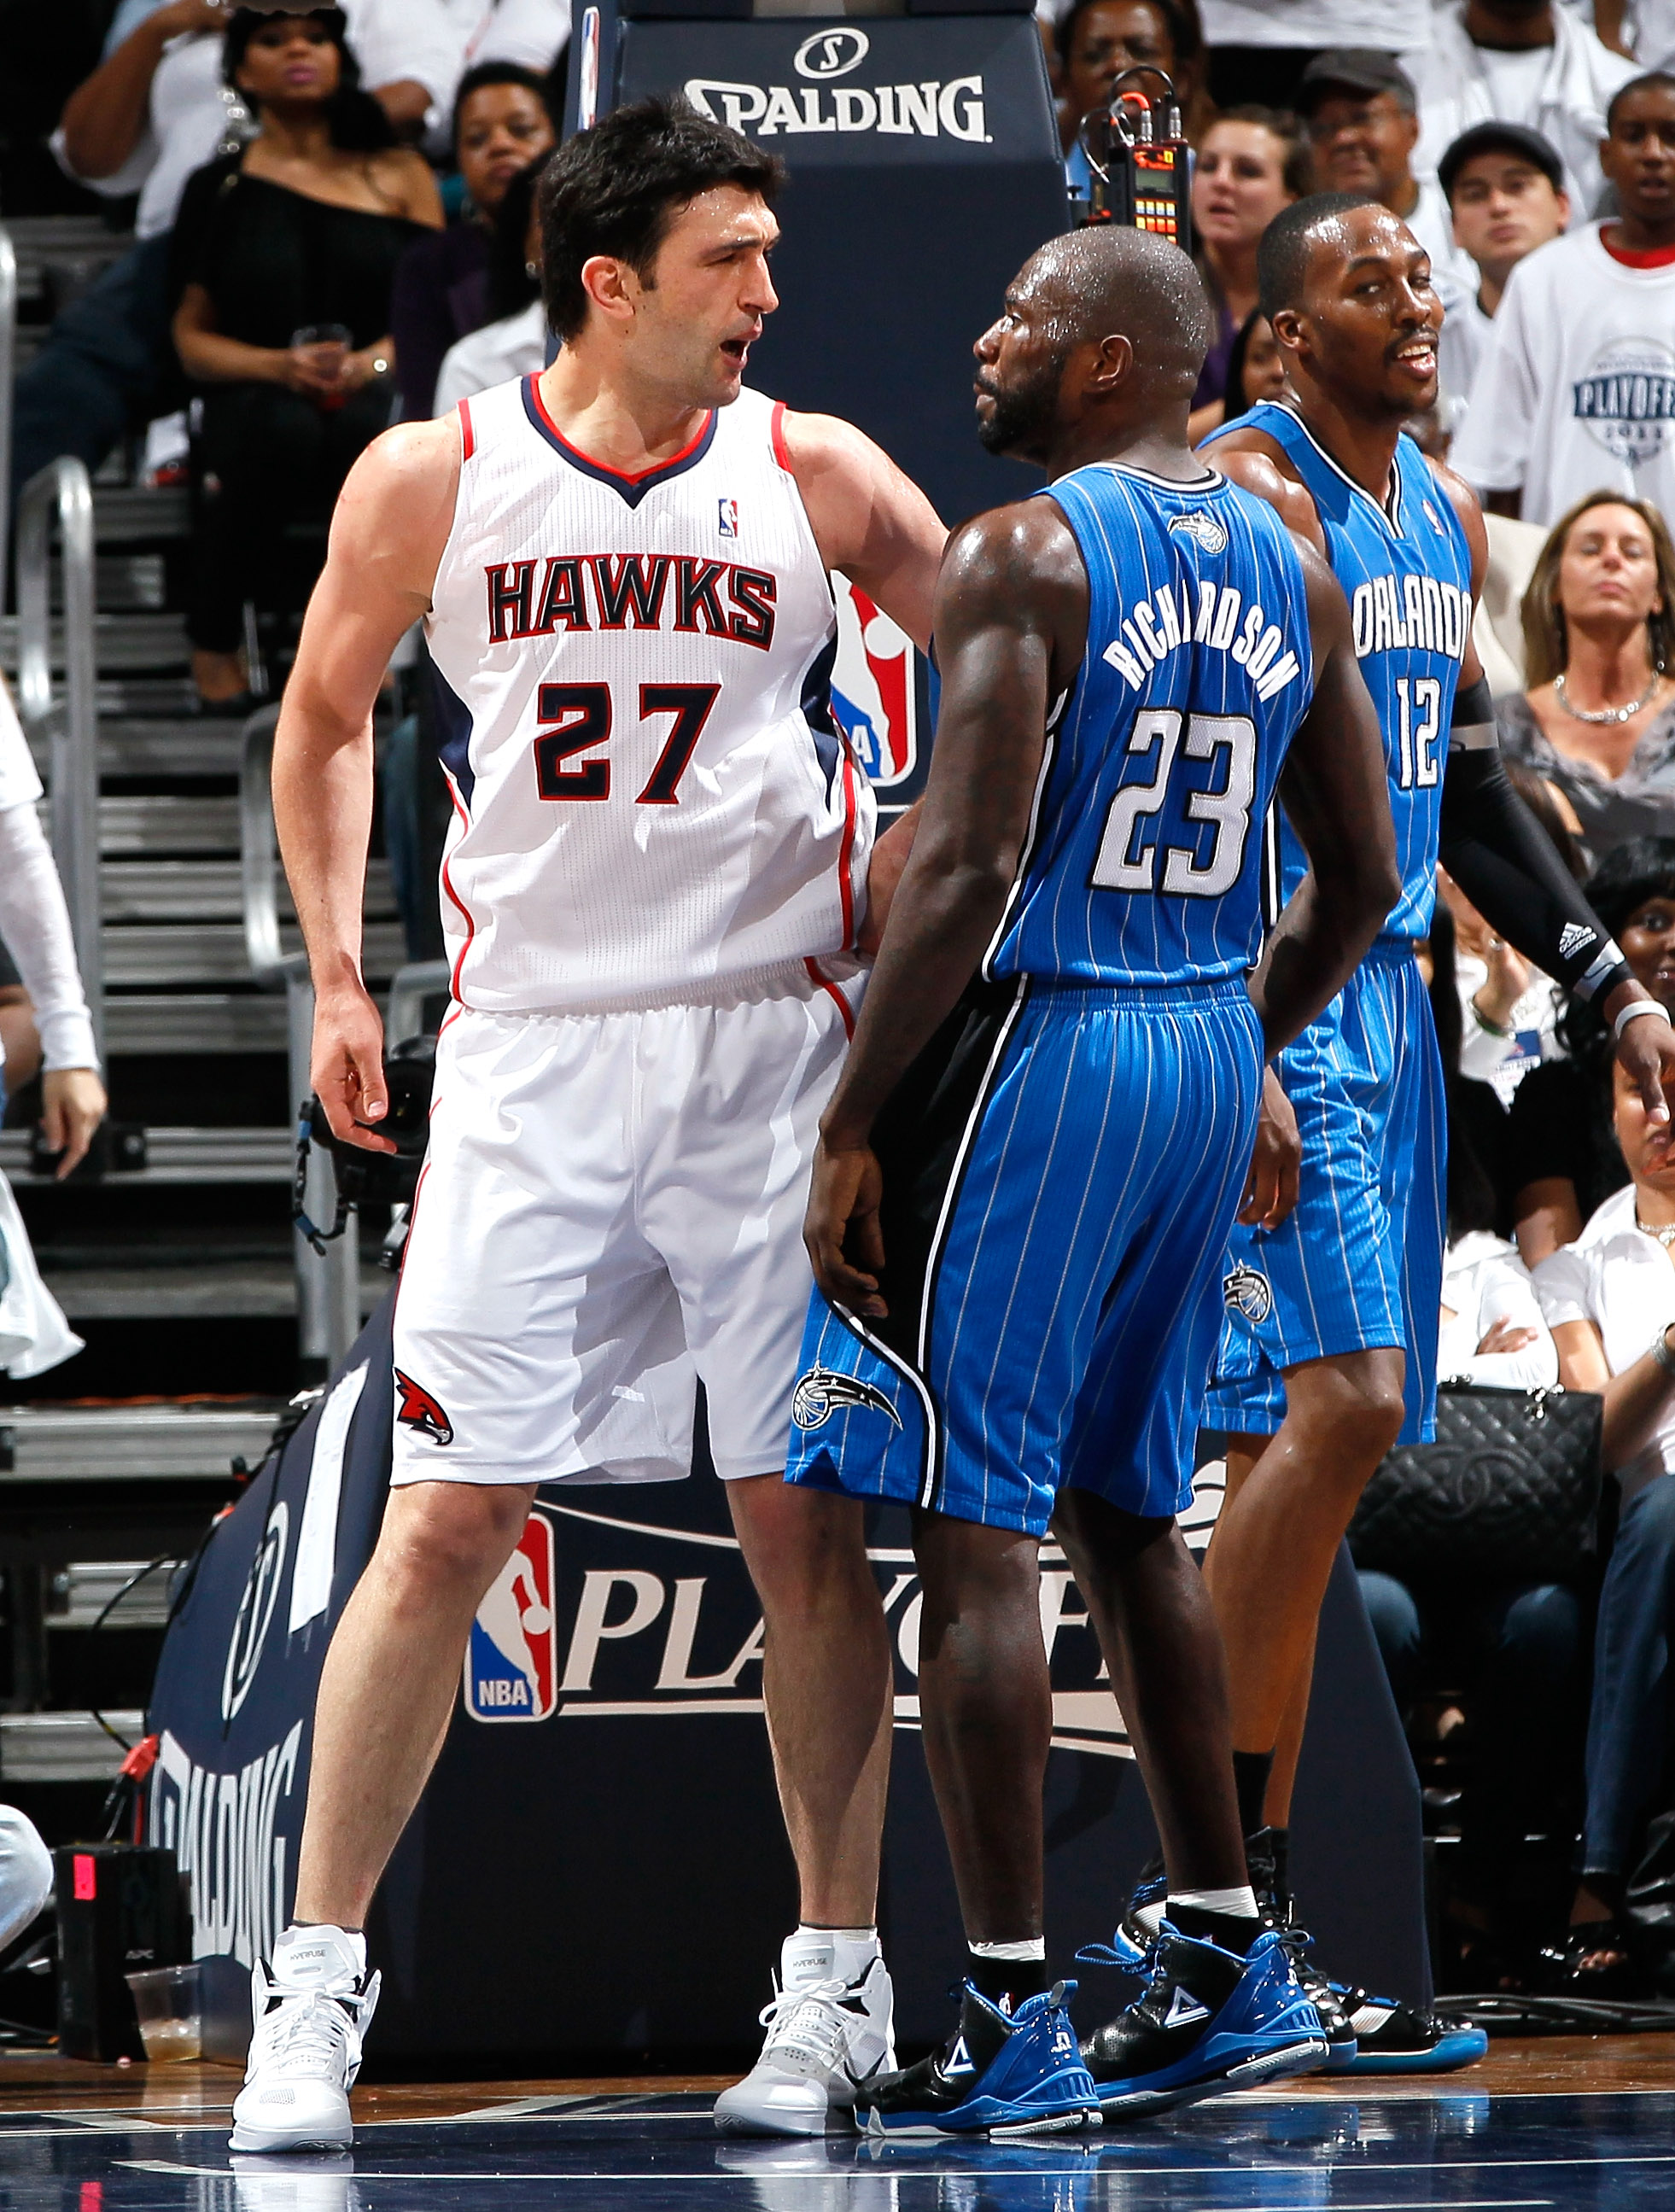 NBA Playoffs 2011: Four Things the Magic Need to Change to Beat